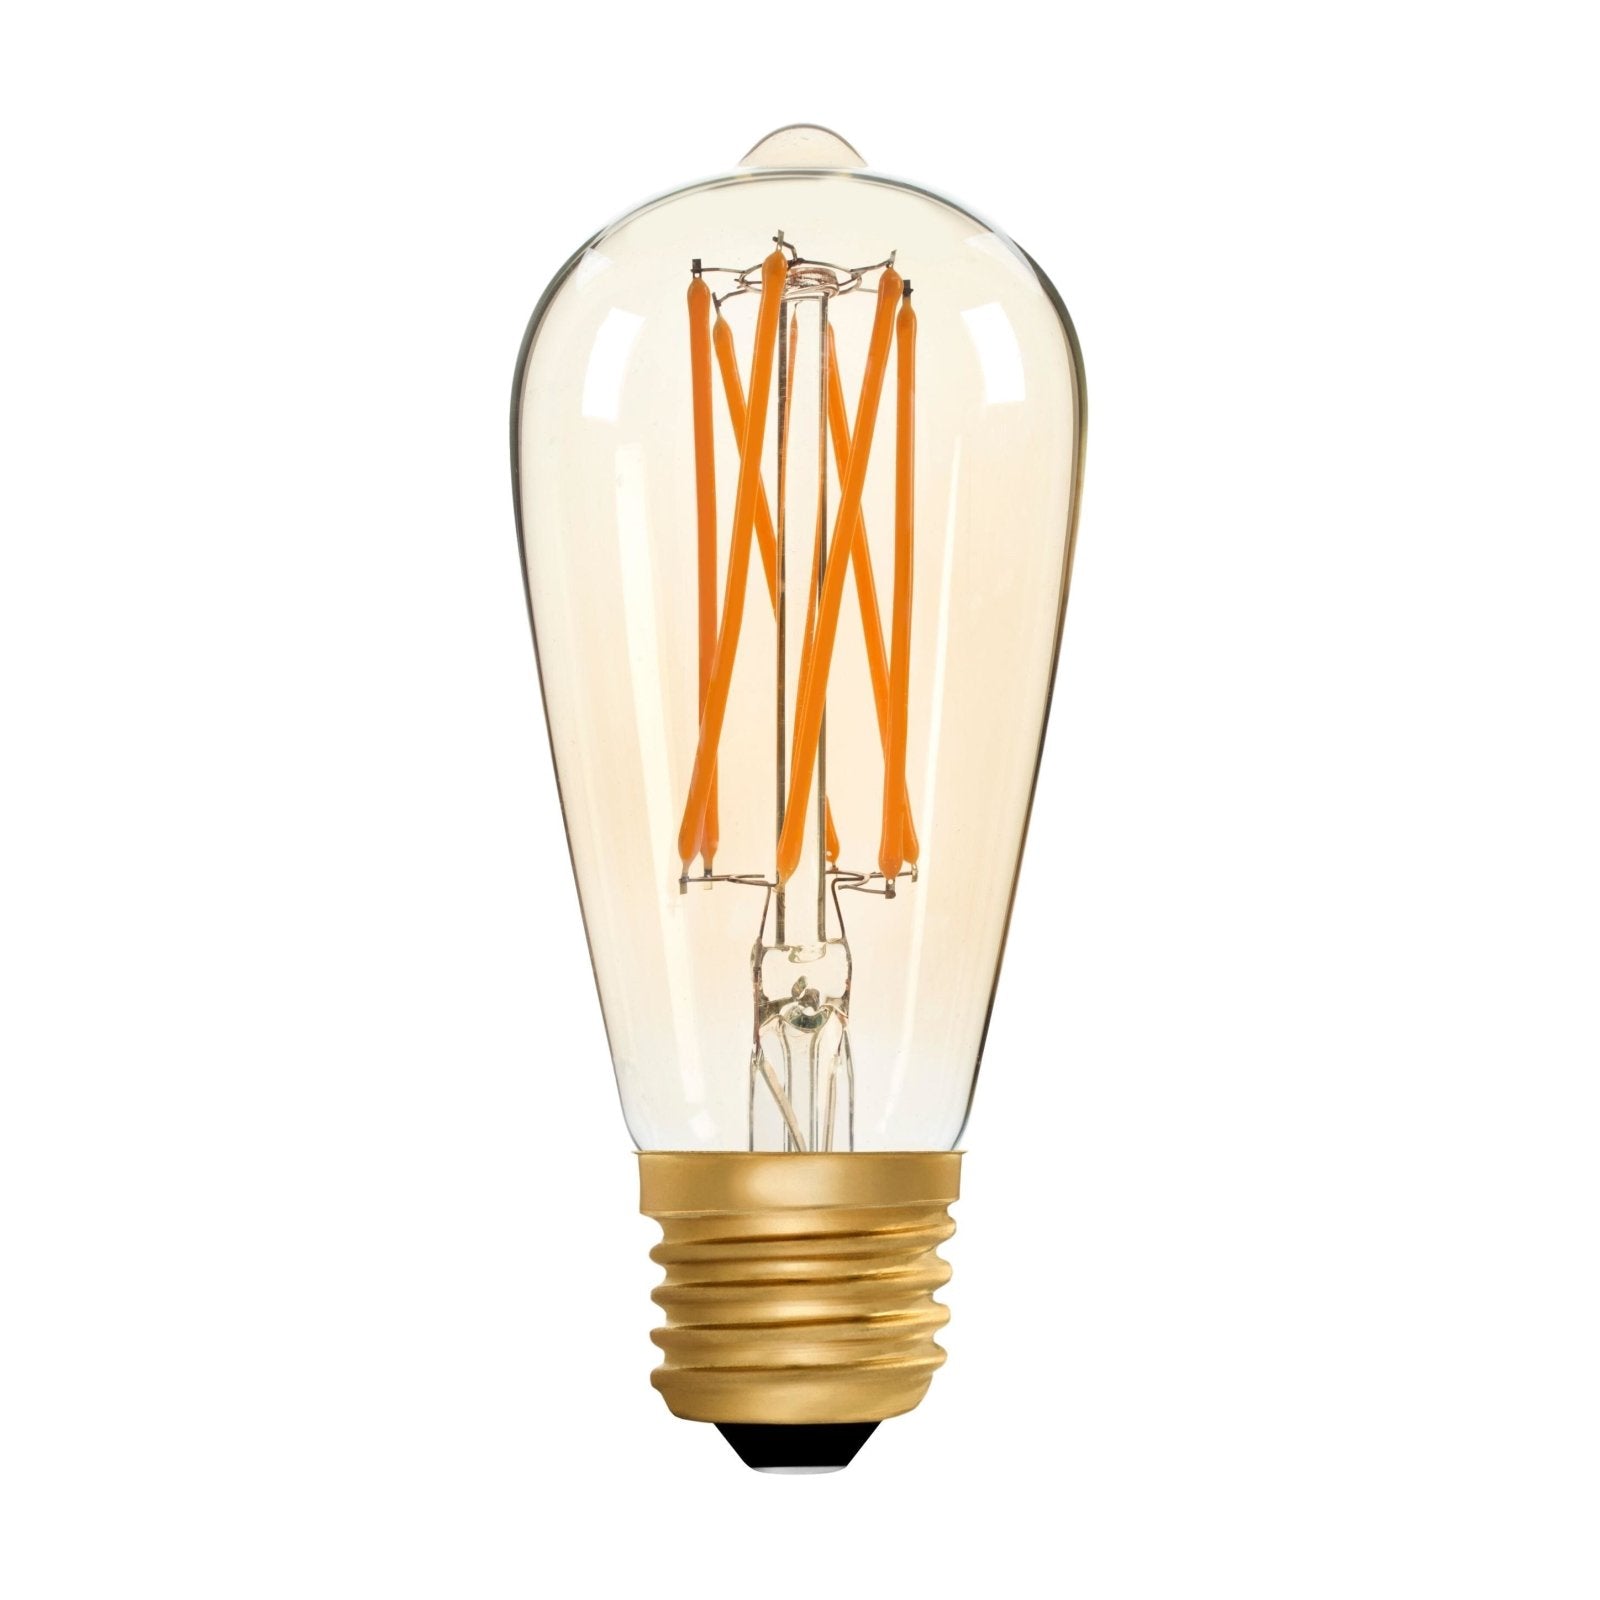 Squirrel Cage ST64 Amber 6W E27 2200K - LED Lamp from RETROLIGHT. Made by Zico Lighting.